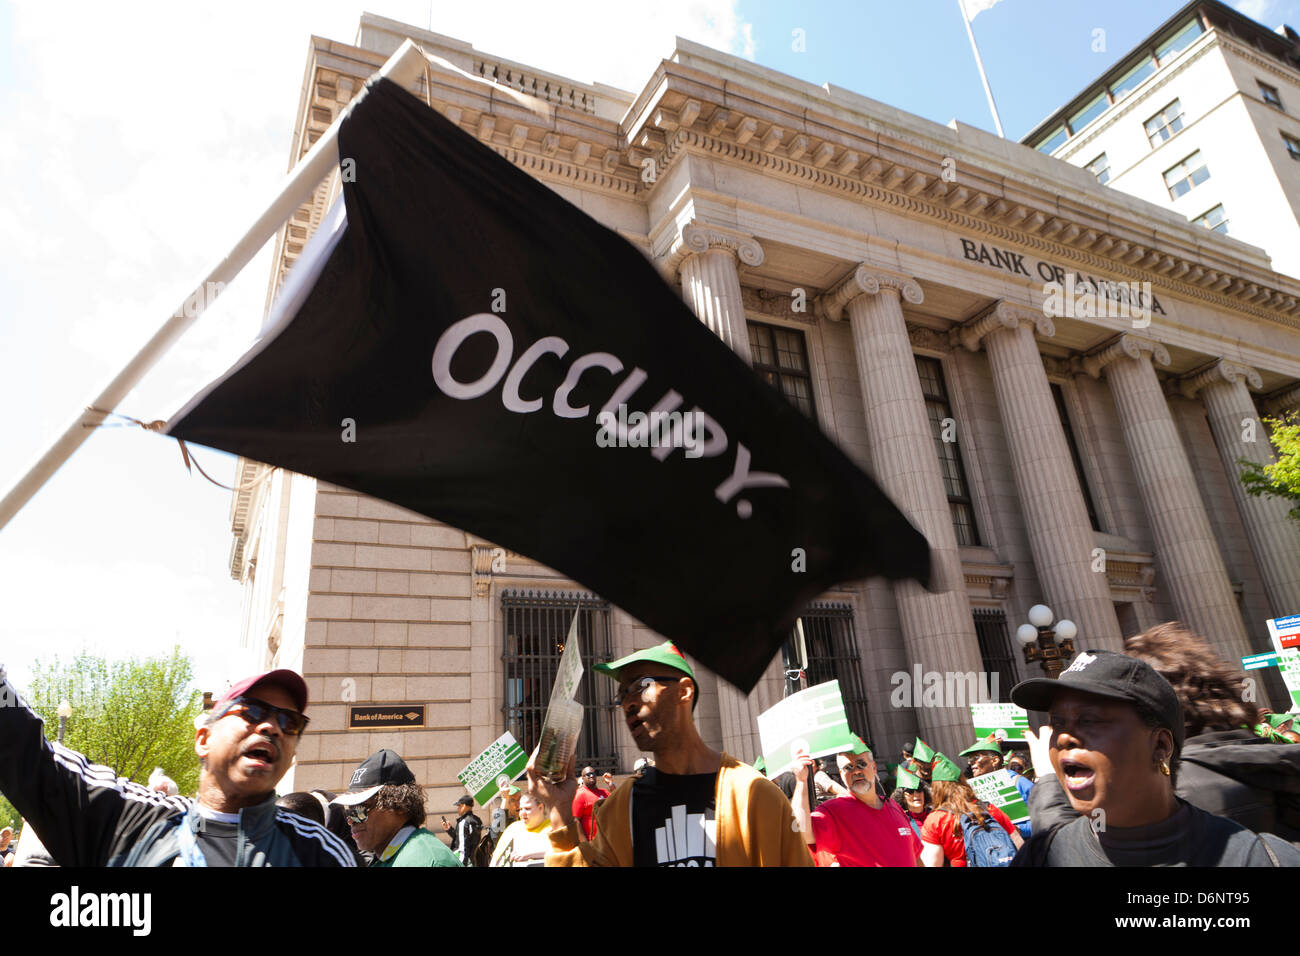 Man waving an OCCUPY flag at a rally in front of the Bank Of America building, Washington DC Stock Photo